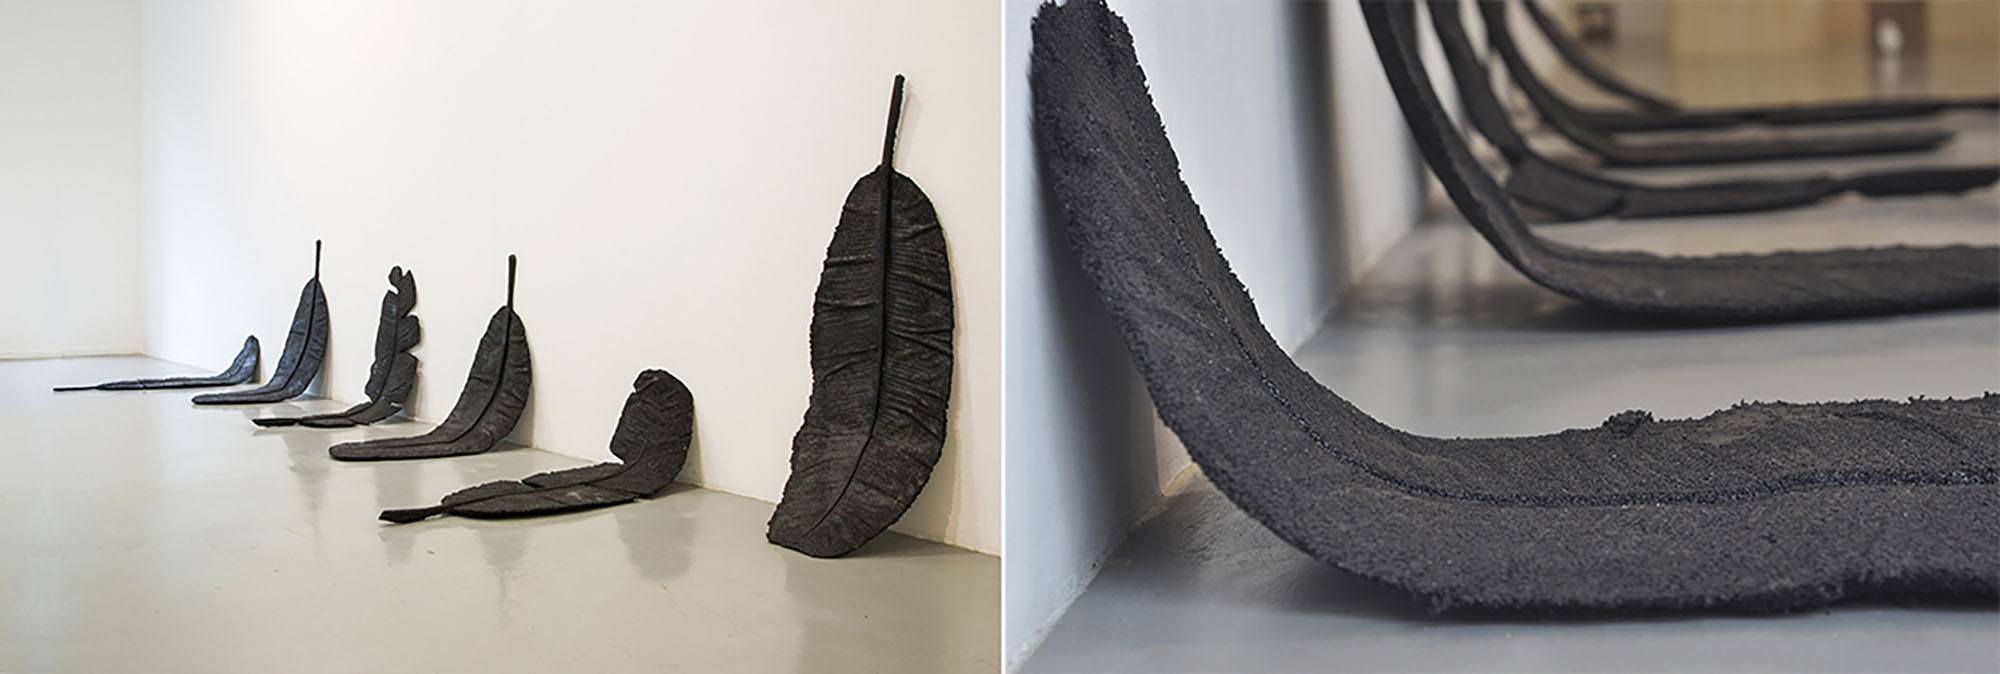 'Tropical', May 2016, 6 banana leaves casted in recycled rubber, 55 x 15 x 1 (each leaf approximately).
